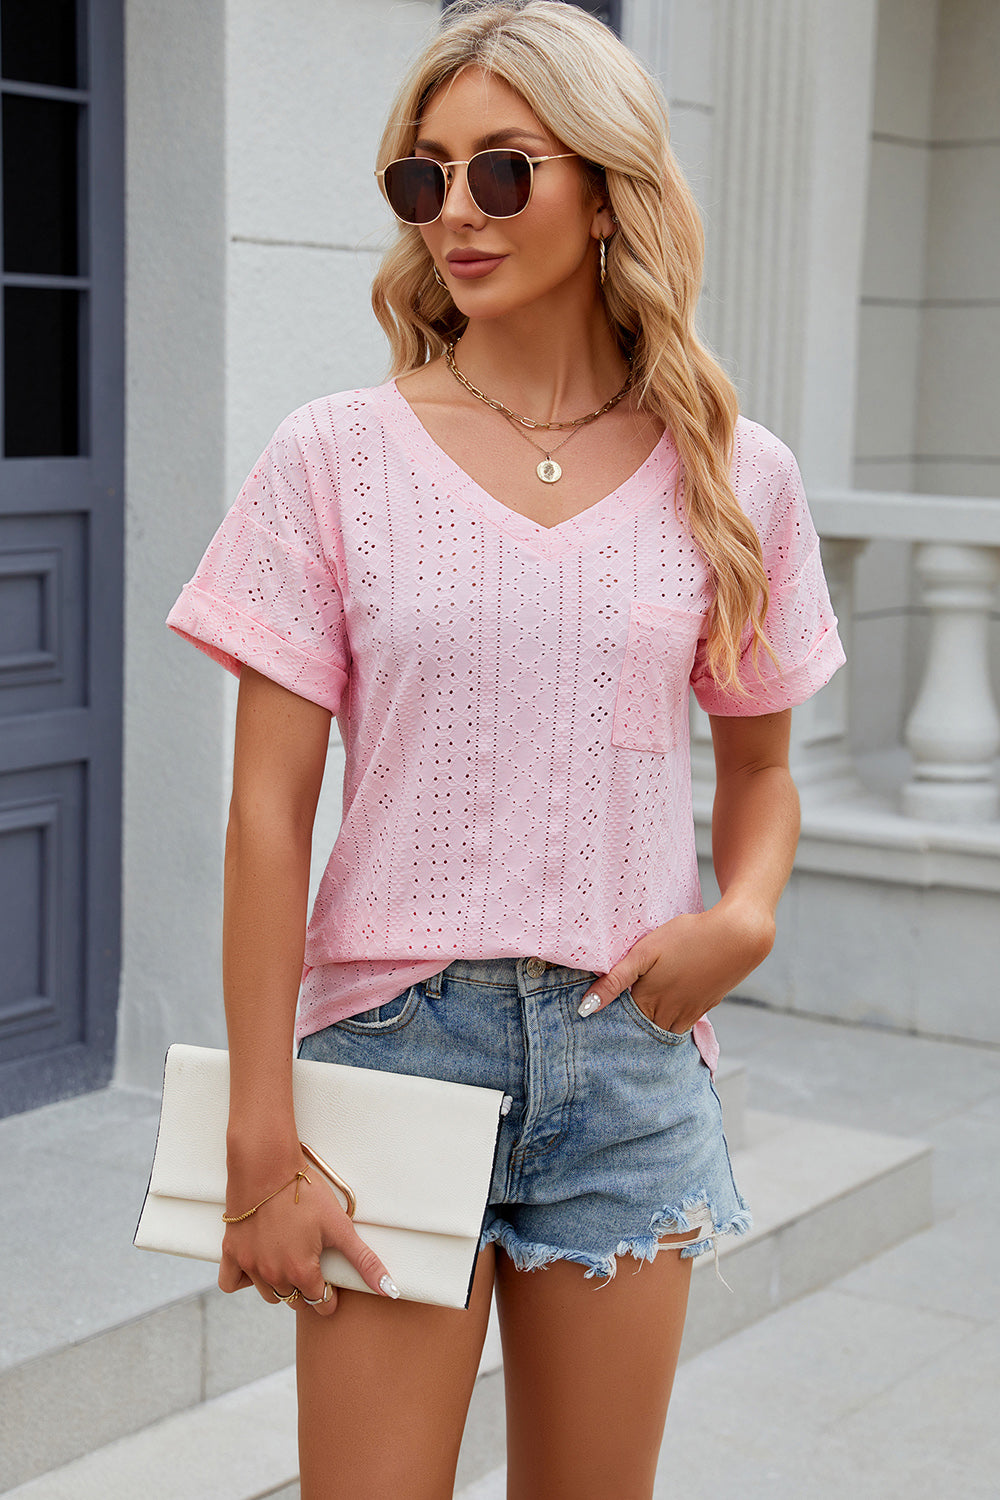 Chic Eyelet V-Neck Tee in 9 shades for versatile style. Perfect for comfort with a touch of elegance. Shop your new favorite